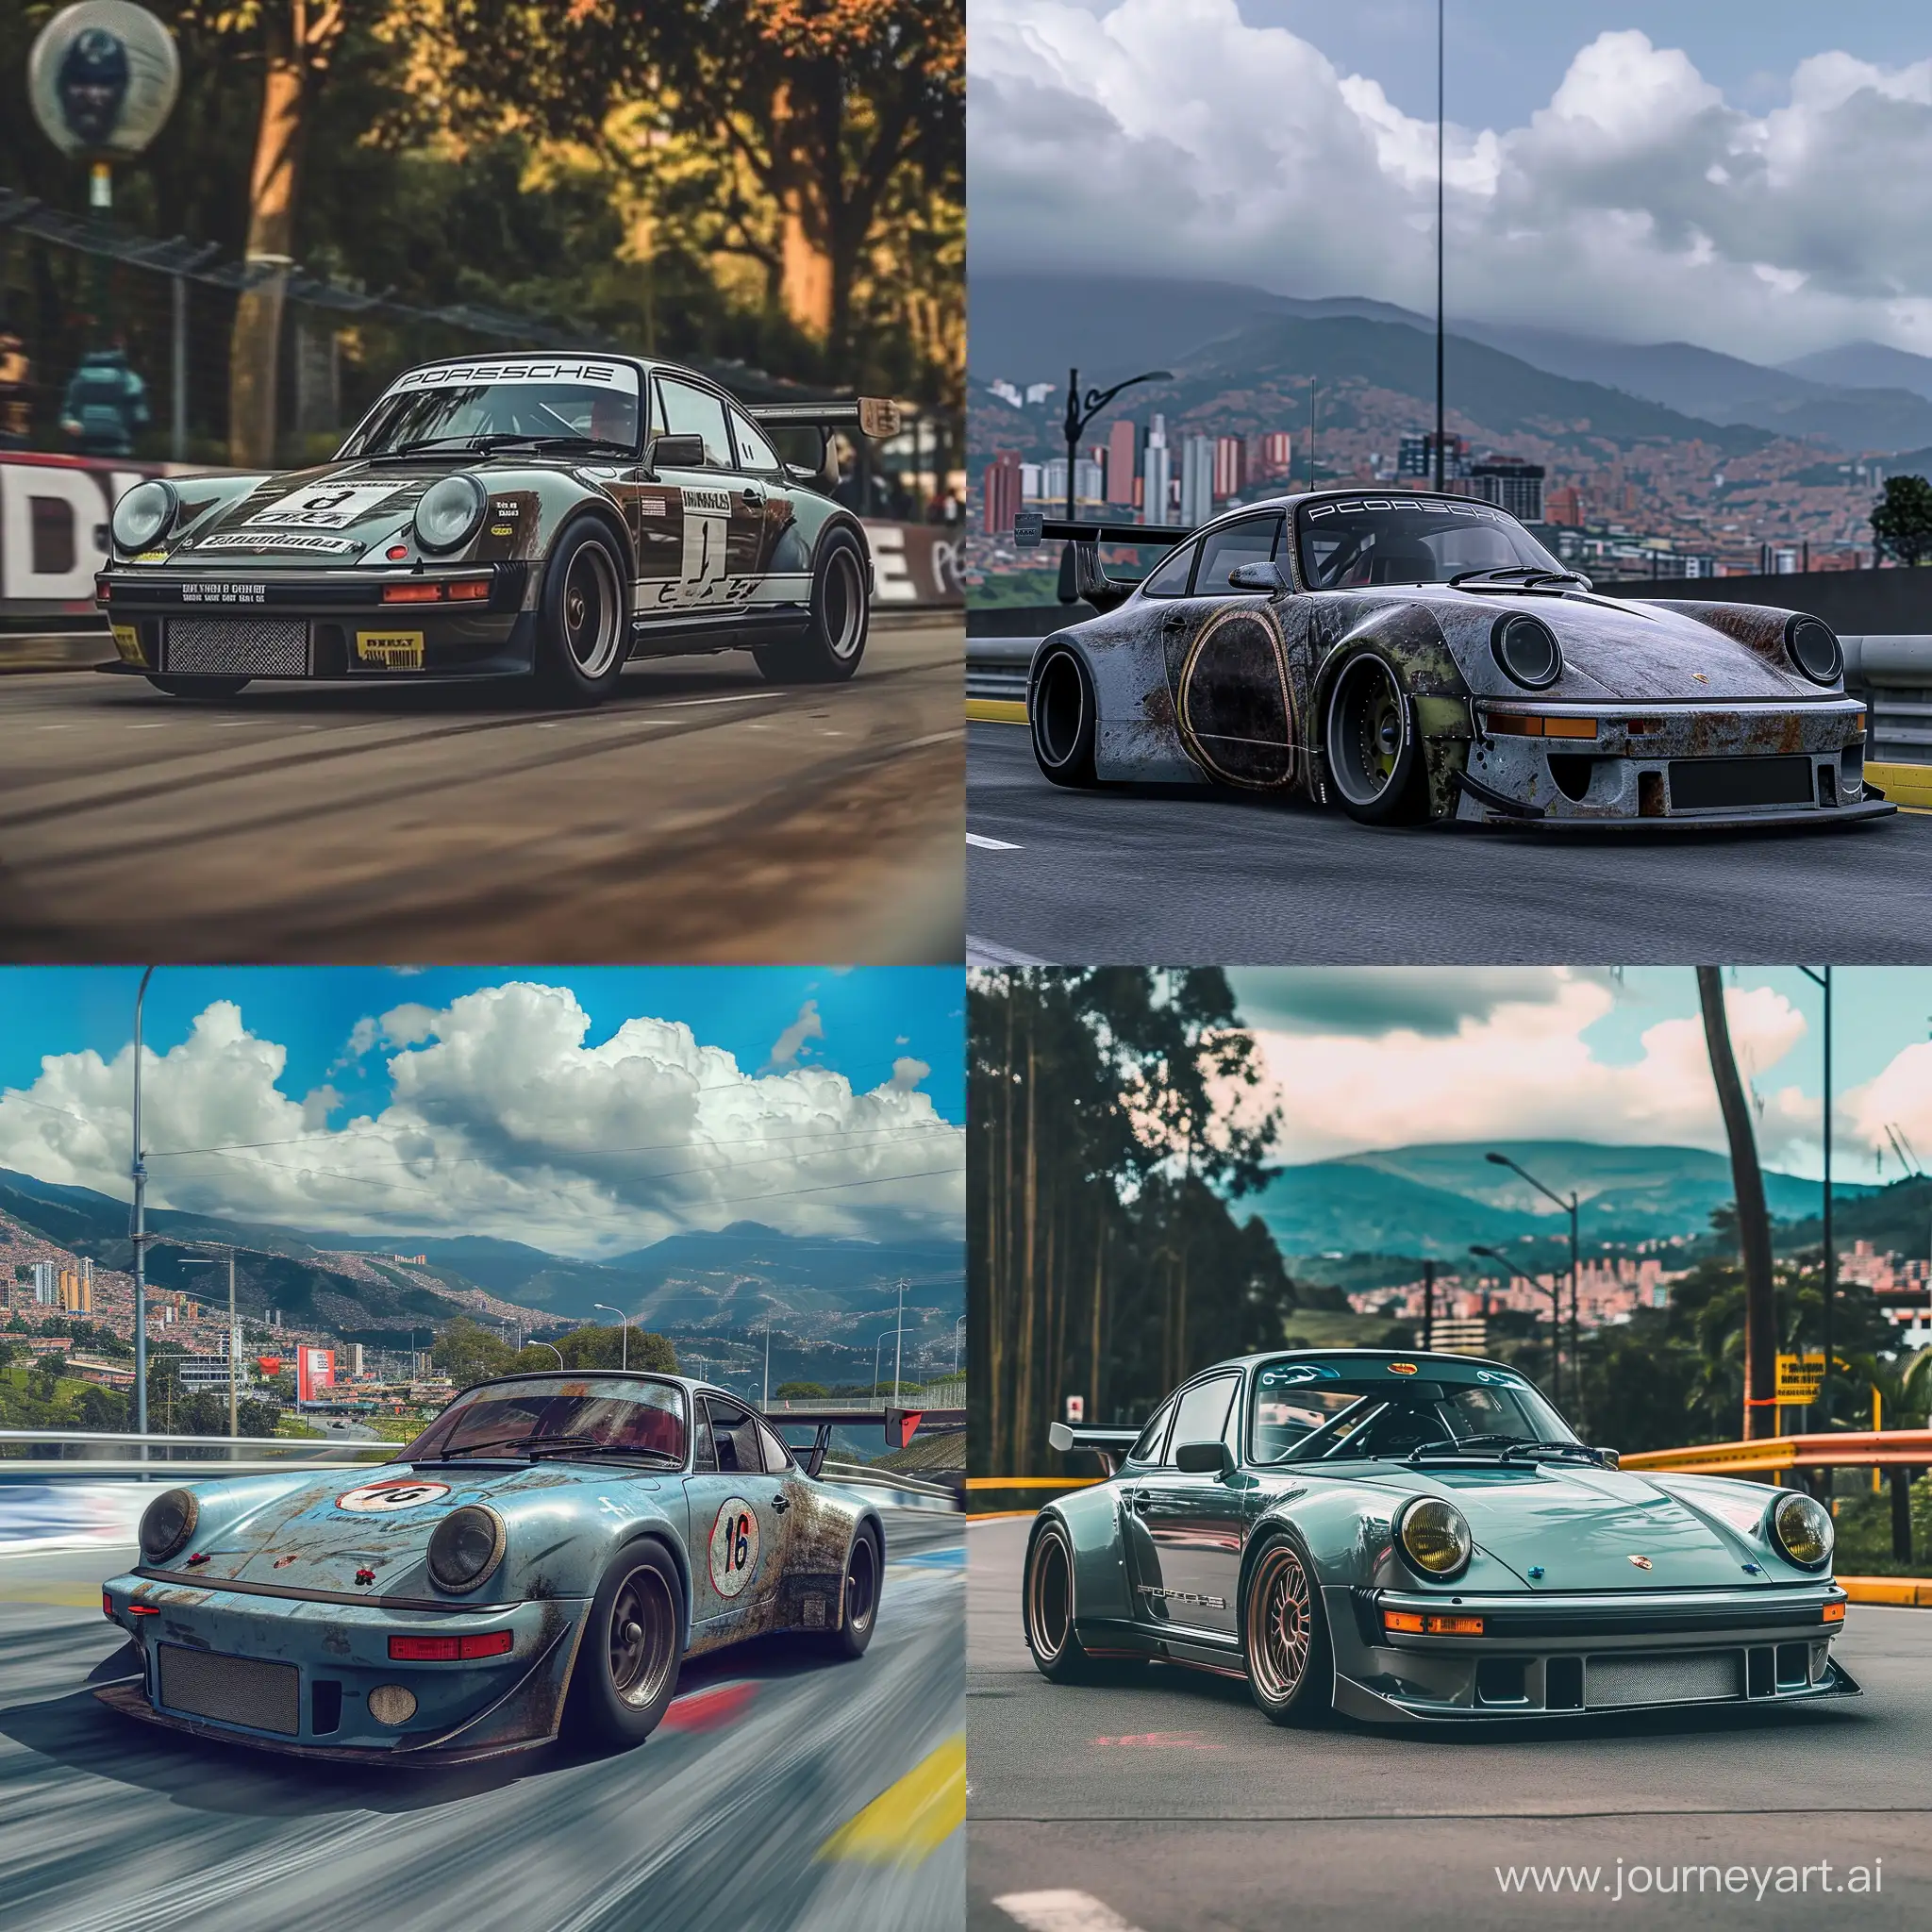 i want an realistic image of an porsche 911 rsr driven by pablo escobar in a race en Medellín .